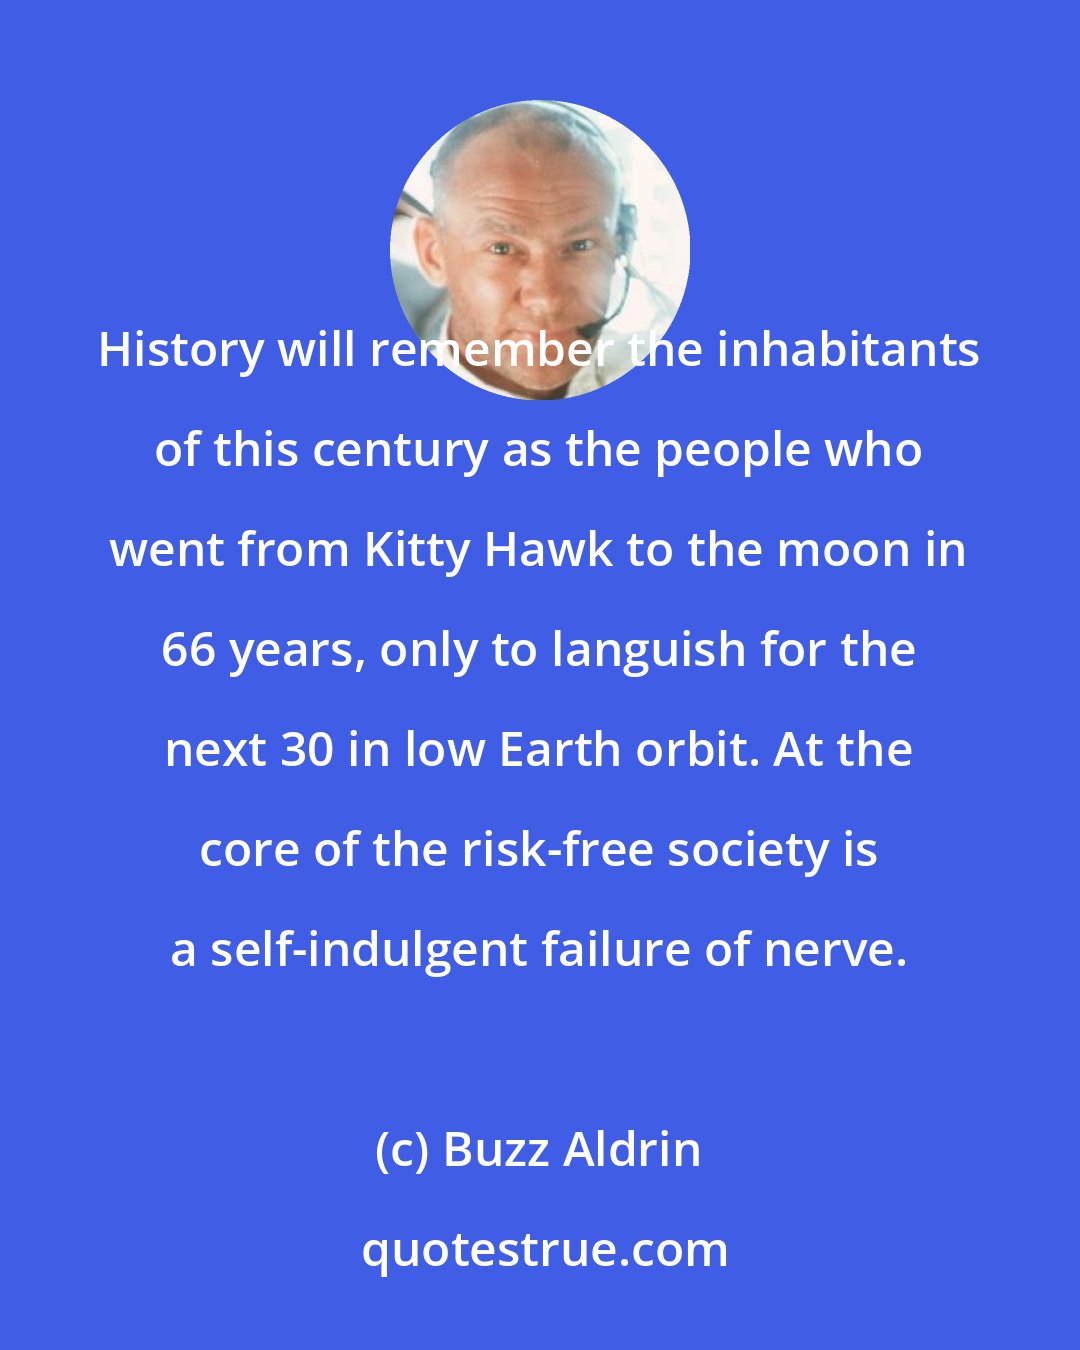 Buzz Aldrin: History will remember the inhabitants of this century as the people who went from Kitty Hawk to the moon in 66 years, only to languish for the next 30 in low Earth orbit. At the core of the risk-free society is a self-indulgent failure of nerve.